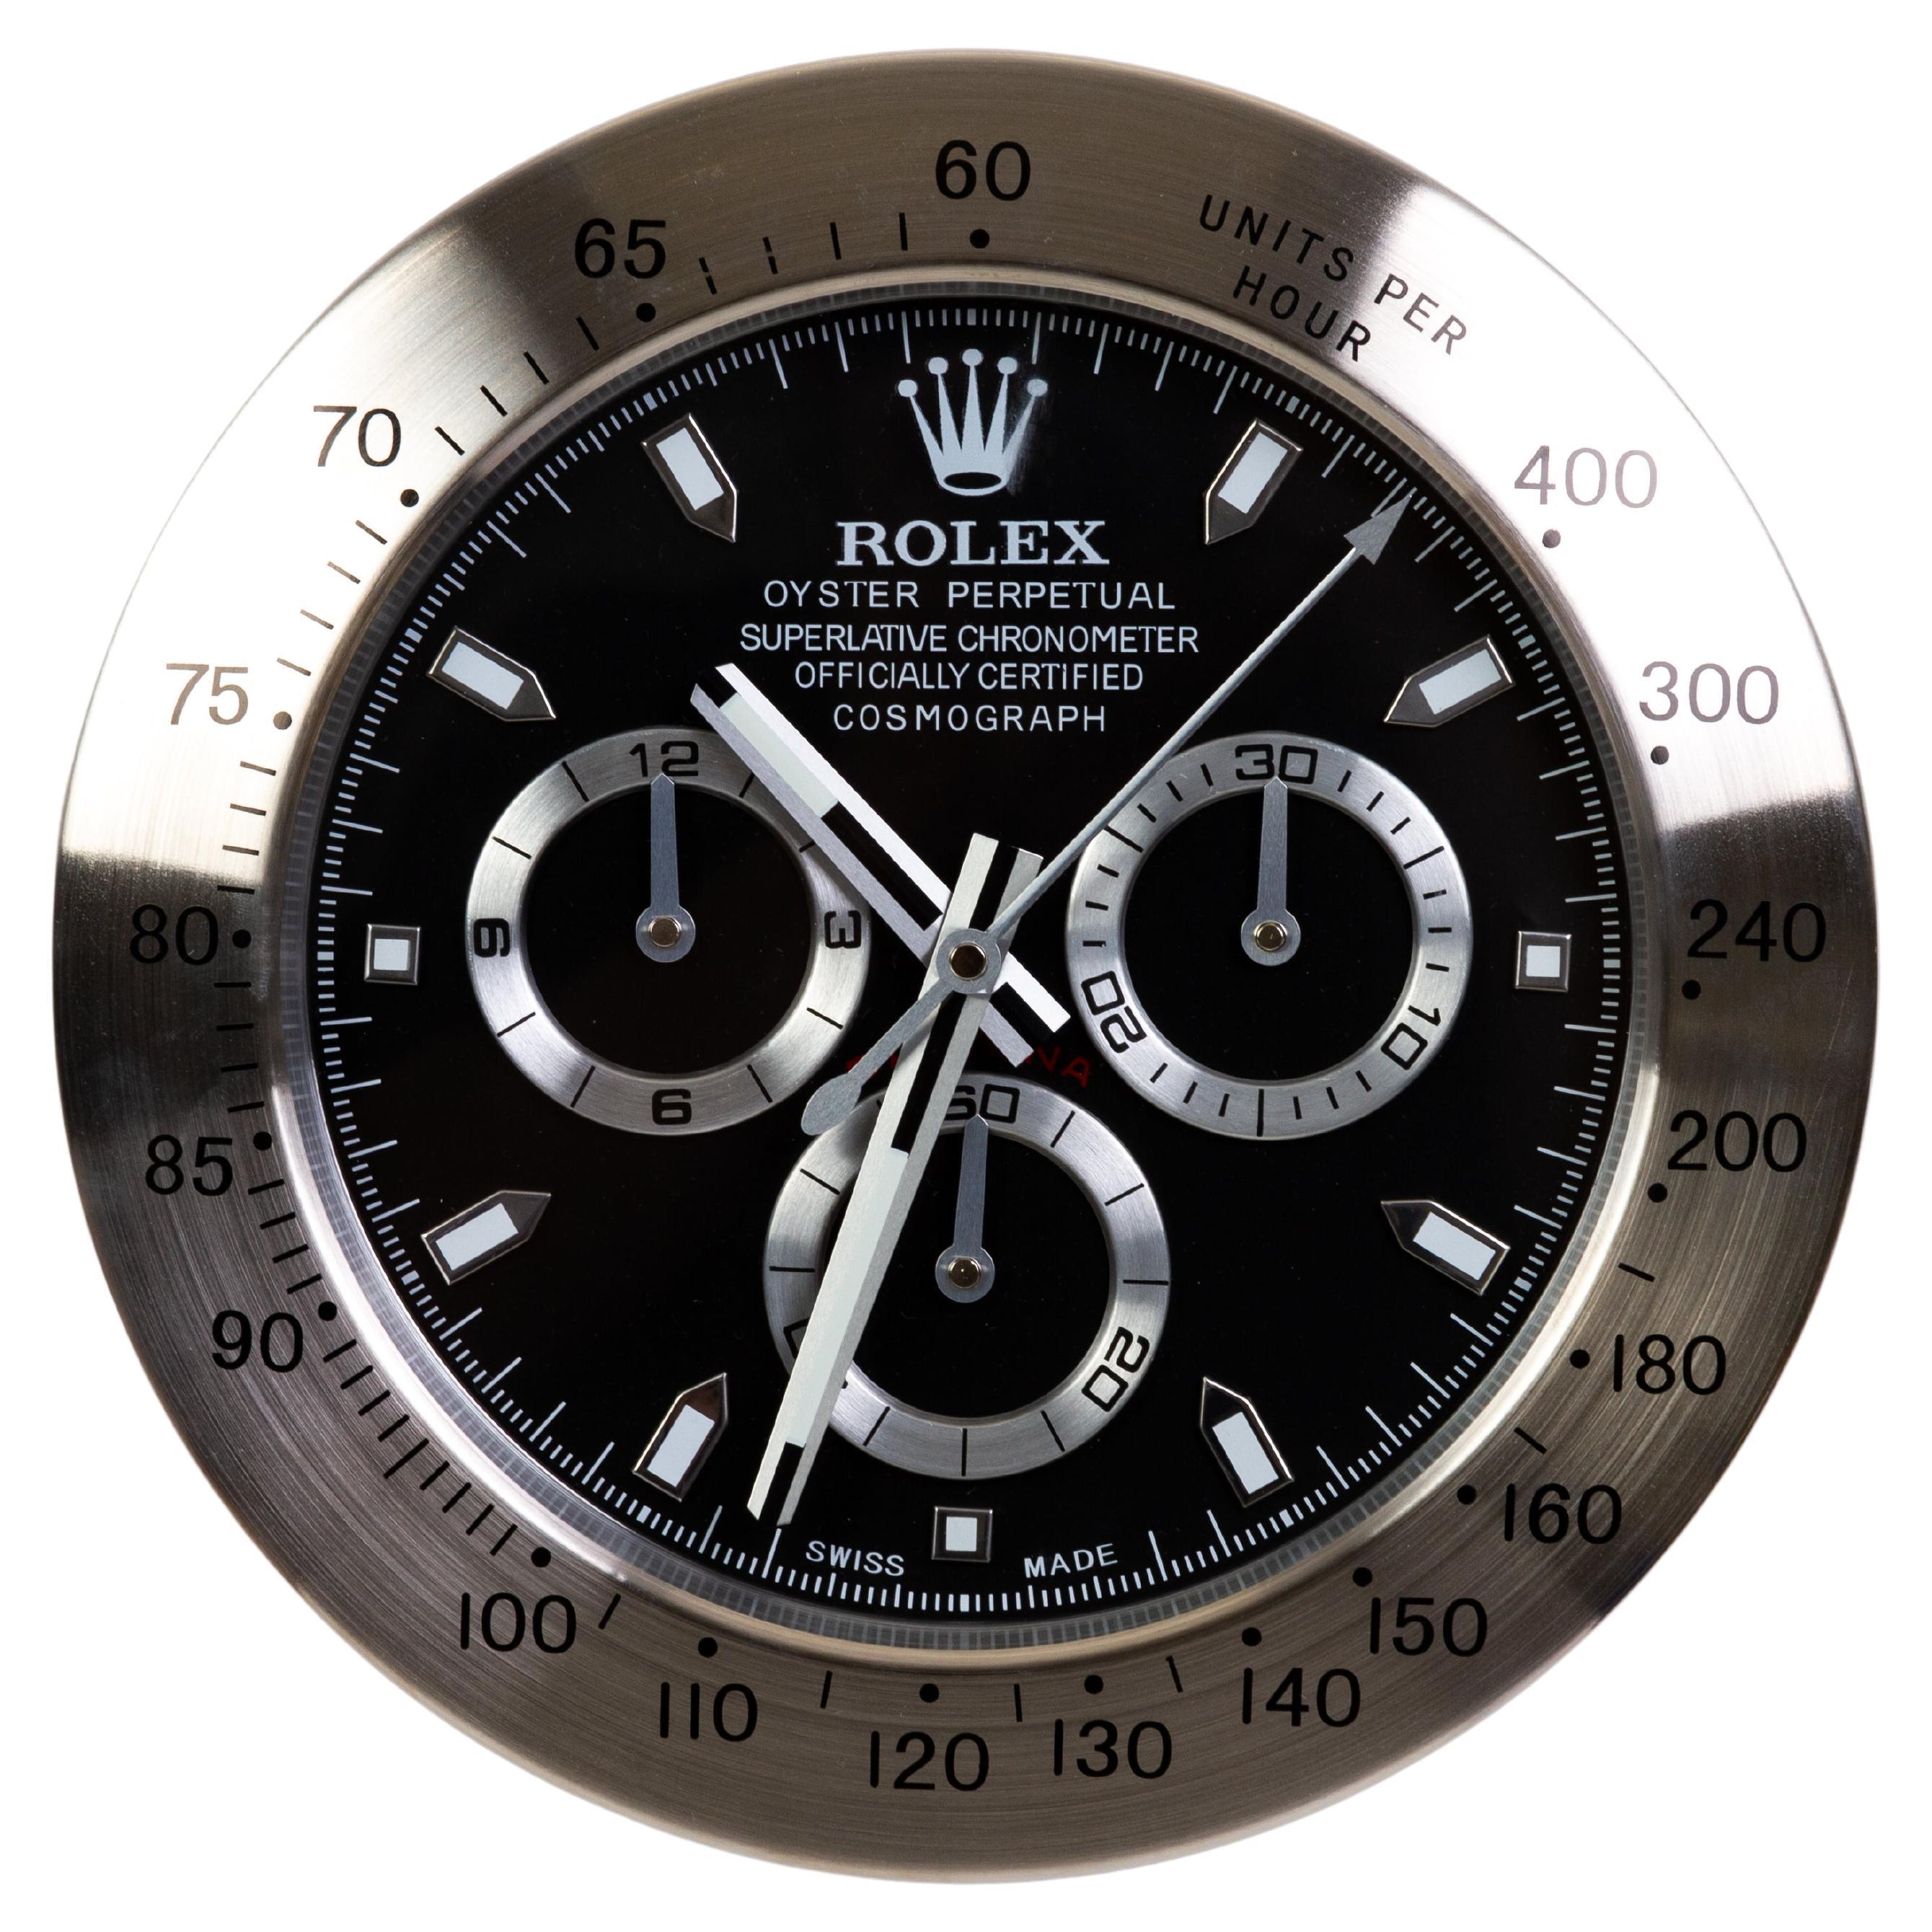 ROLEX Officially Certified Oyster Perpetual Cosmograph Wall Clock at 1stDibs